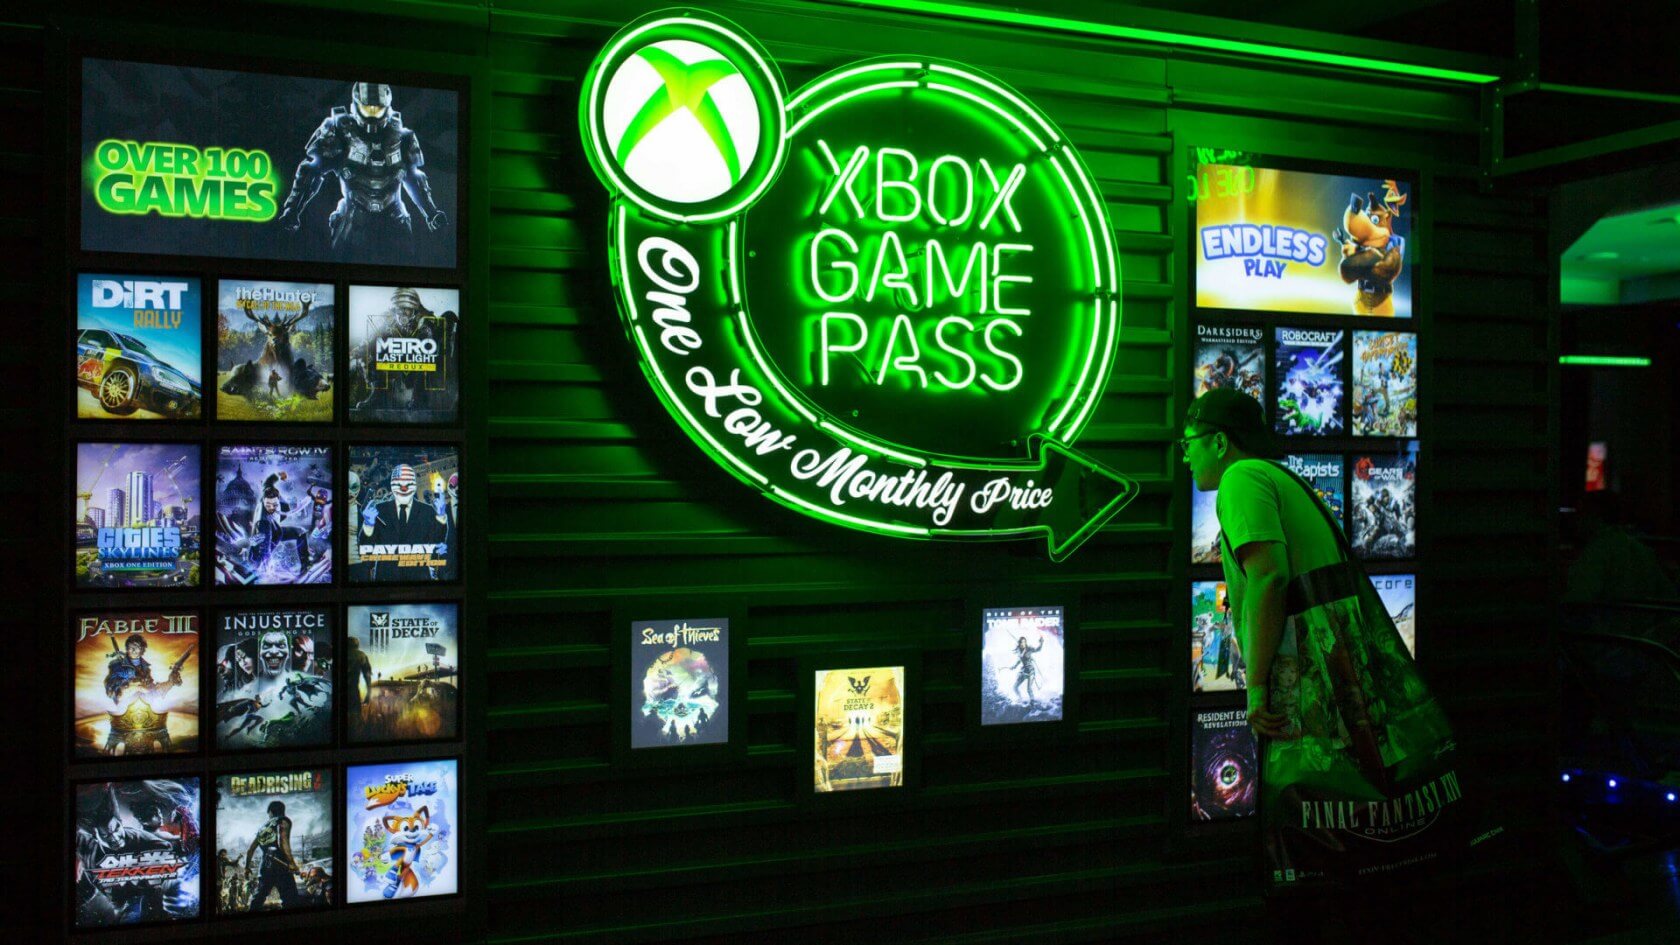 AMD offers up three months of Xbox Game Pass for PC to new customers